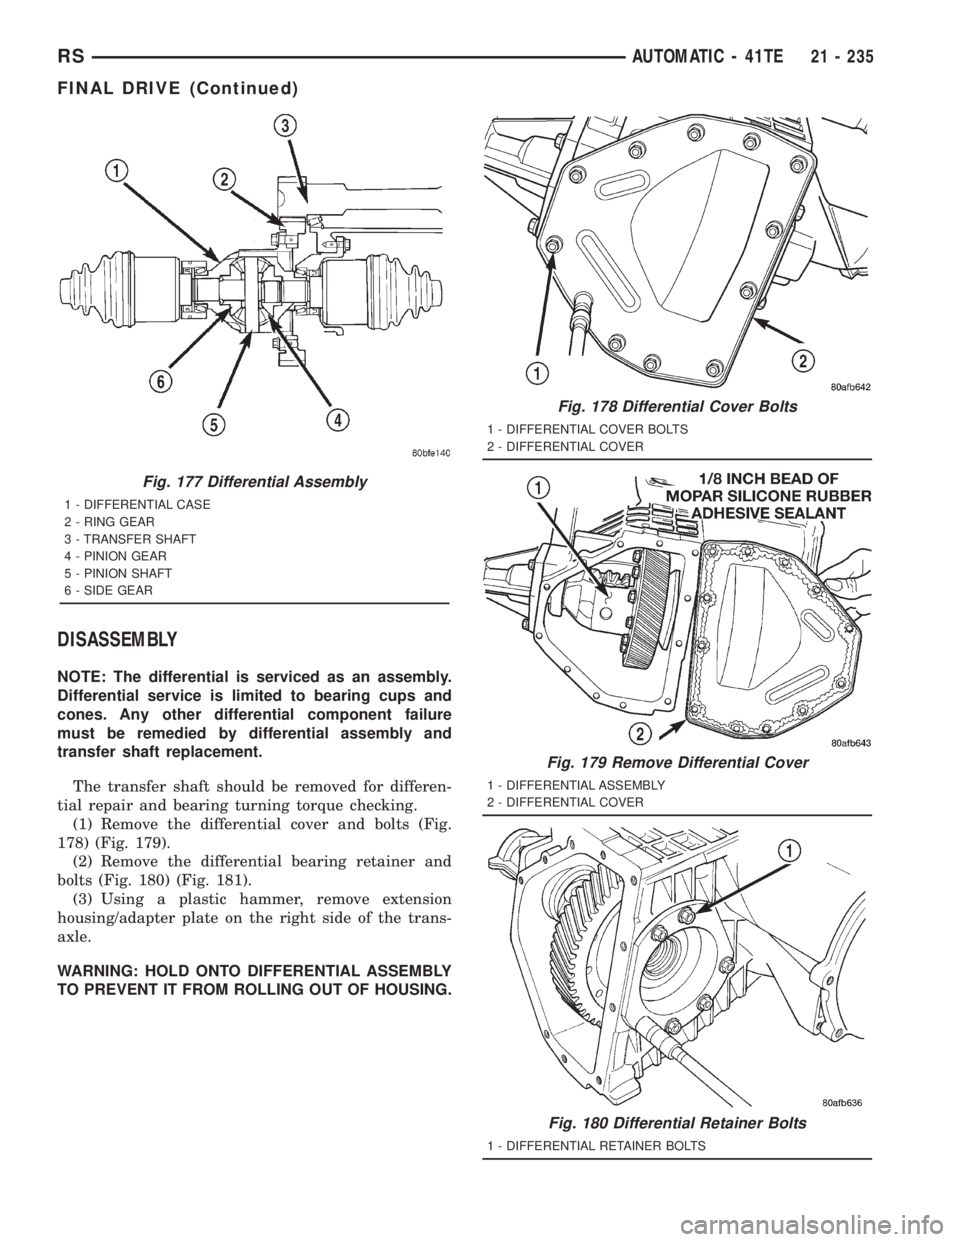 CHRYSLER VOYAGER 2001  Service Manual DISASSEMBLY
NOTE: The differential is serviced as an assembly.
Differential service is limited to bearing cups and
cones. Any other differential component failure
must be remedied by differential asse